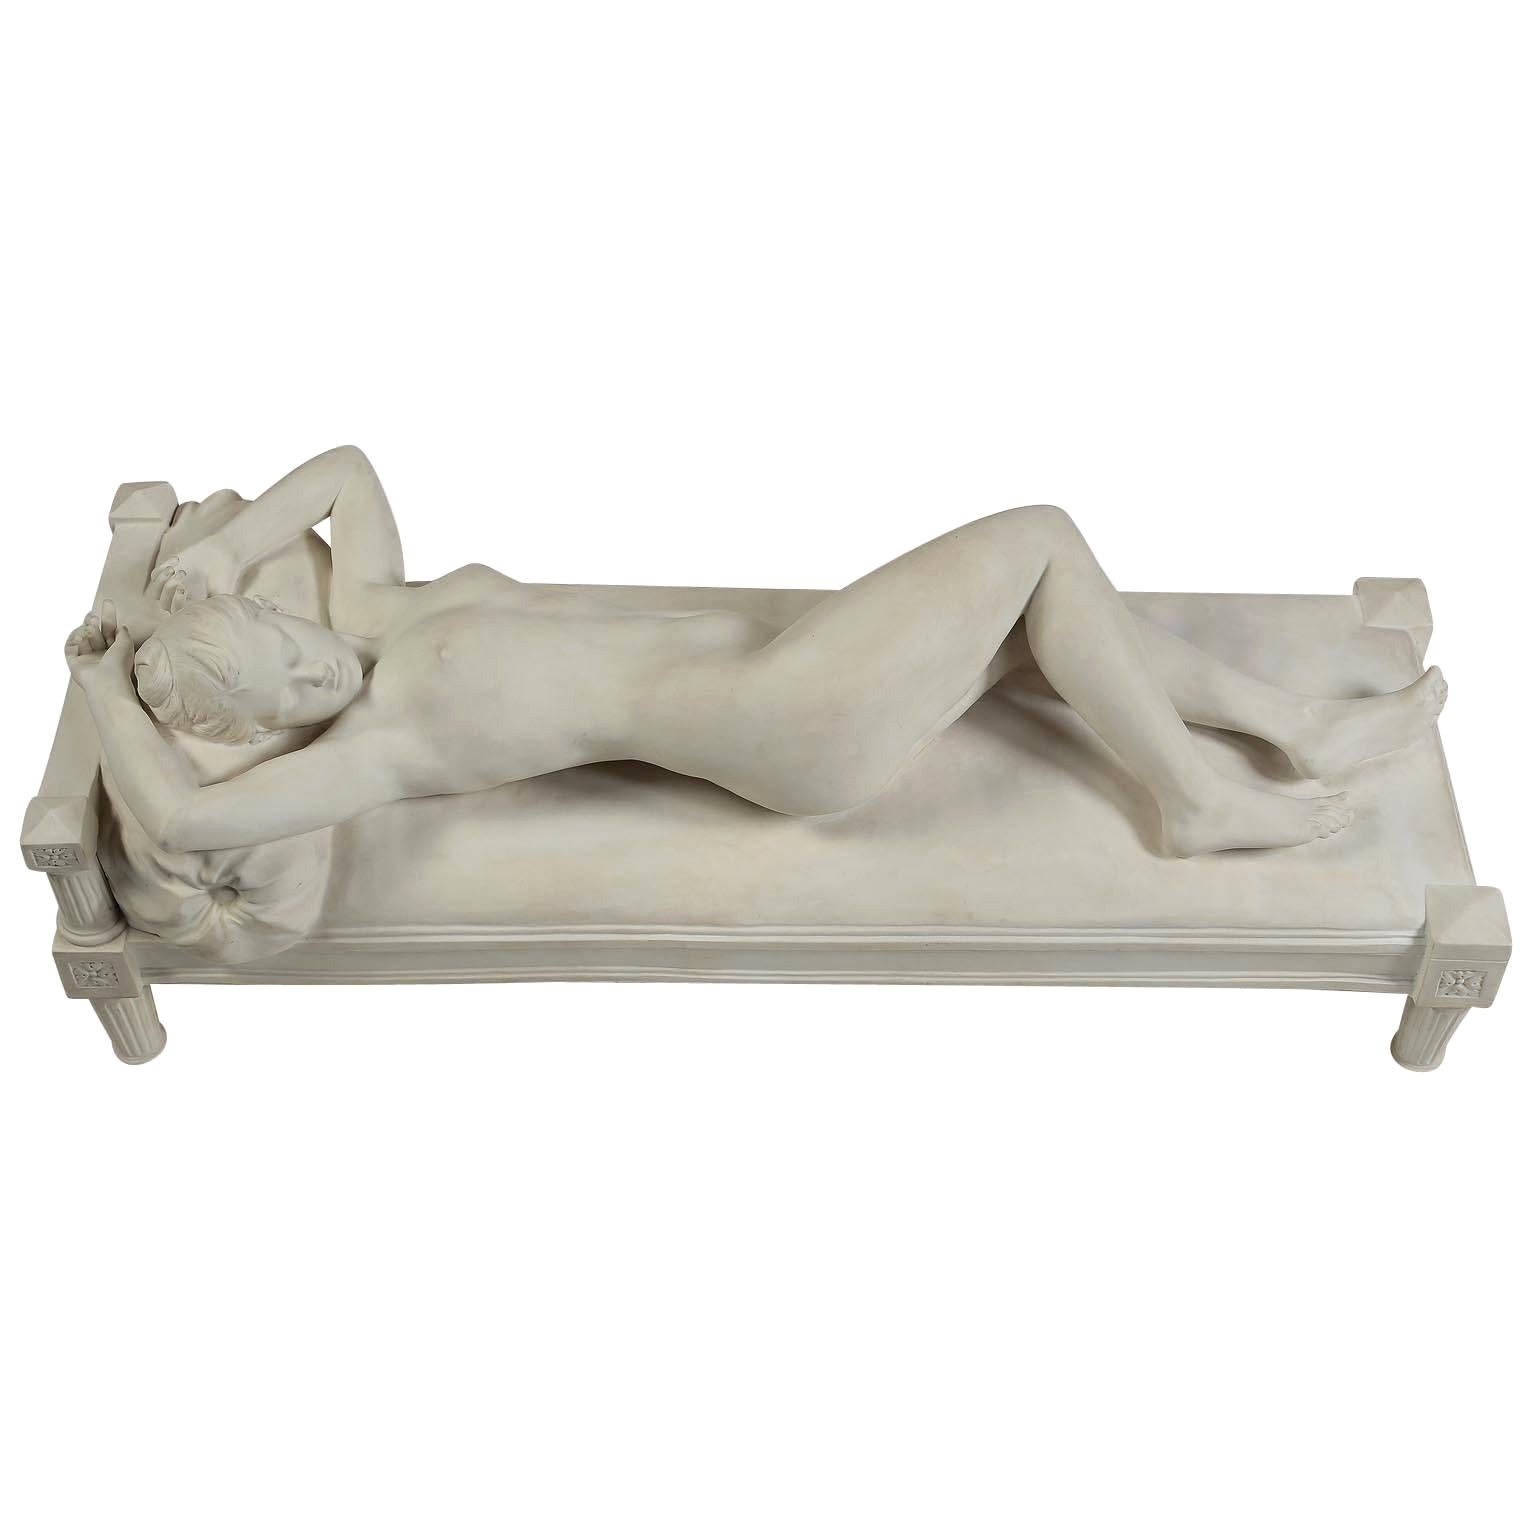 French Sevres Biscuit Porcelain Figure of a Nude